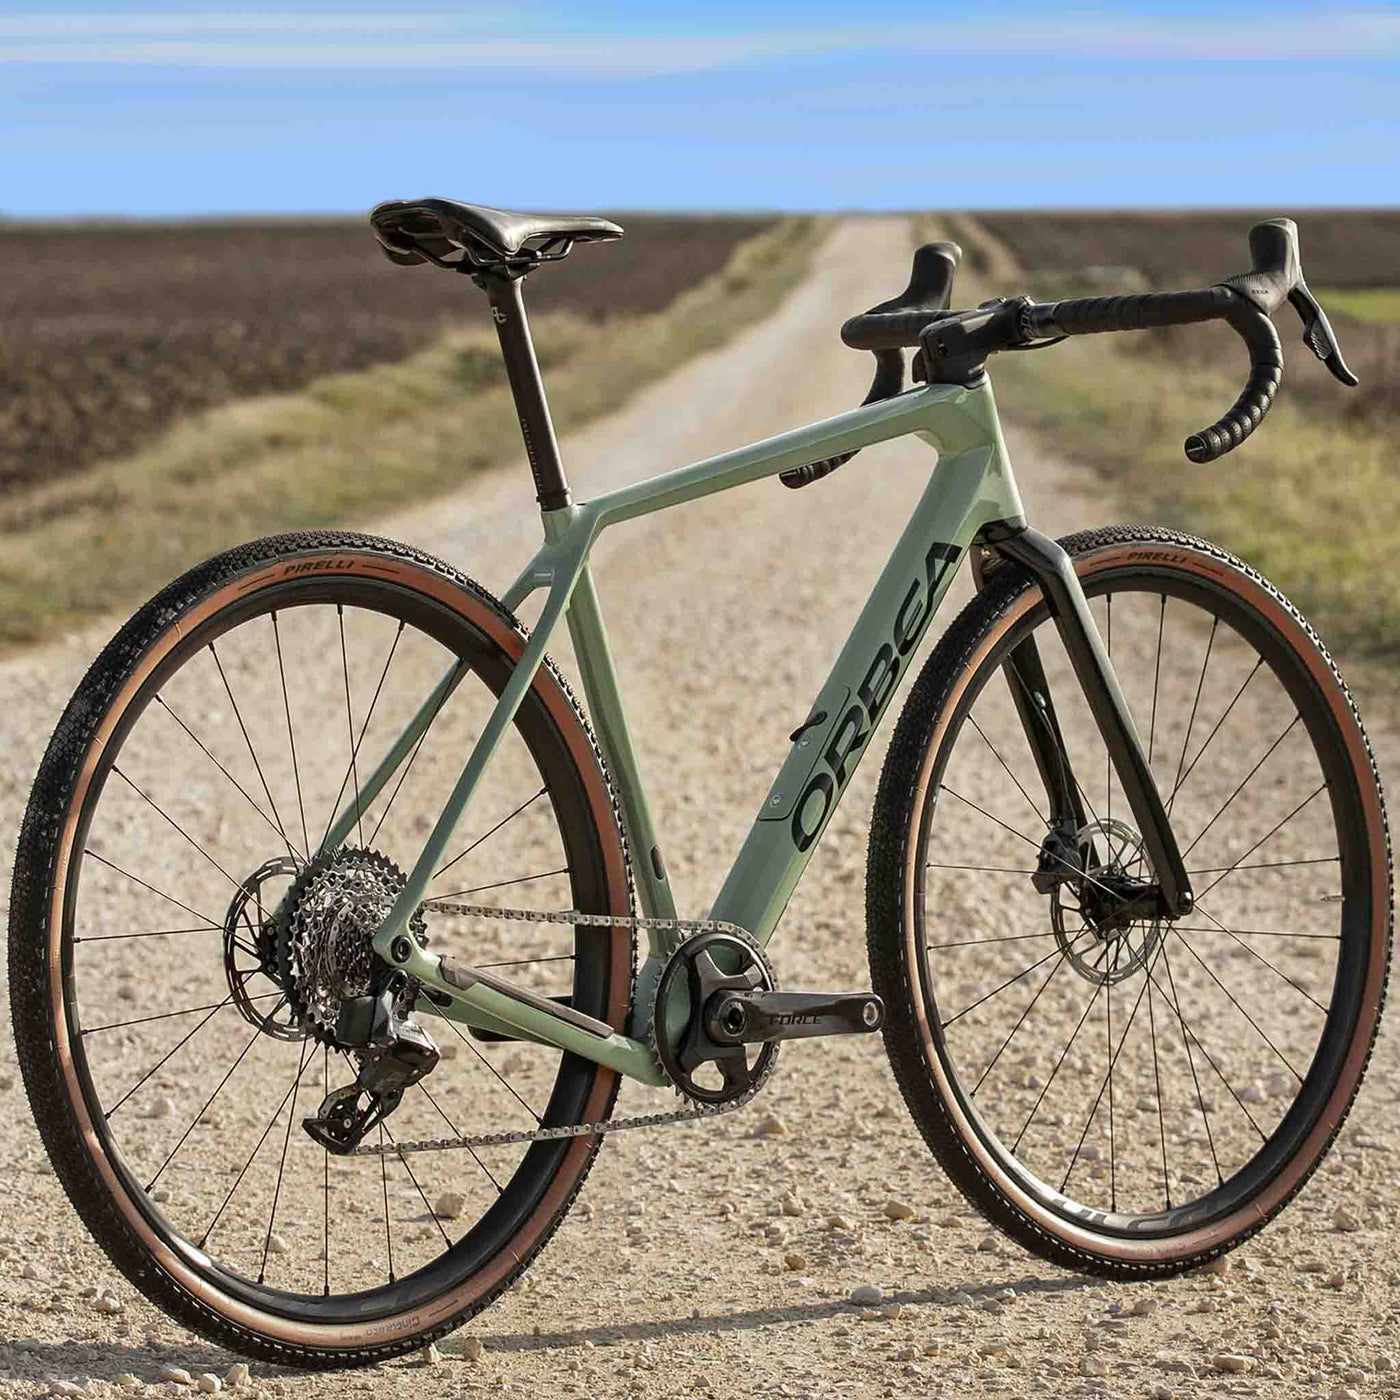 Gravel ebikes suitable for bike packing all day adventures commuting removable battery for quick charging BMC Merida Bianchi Orbea